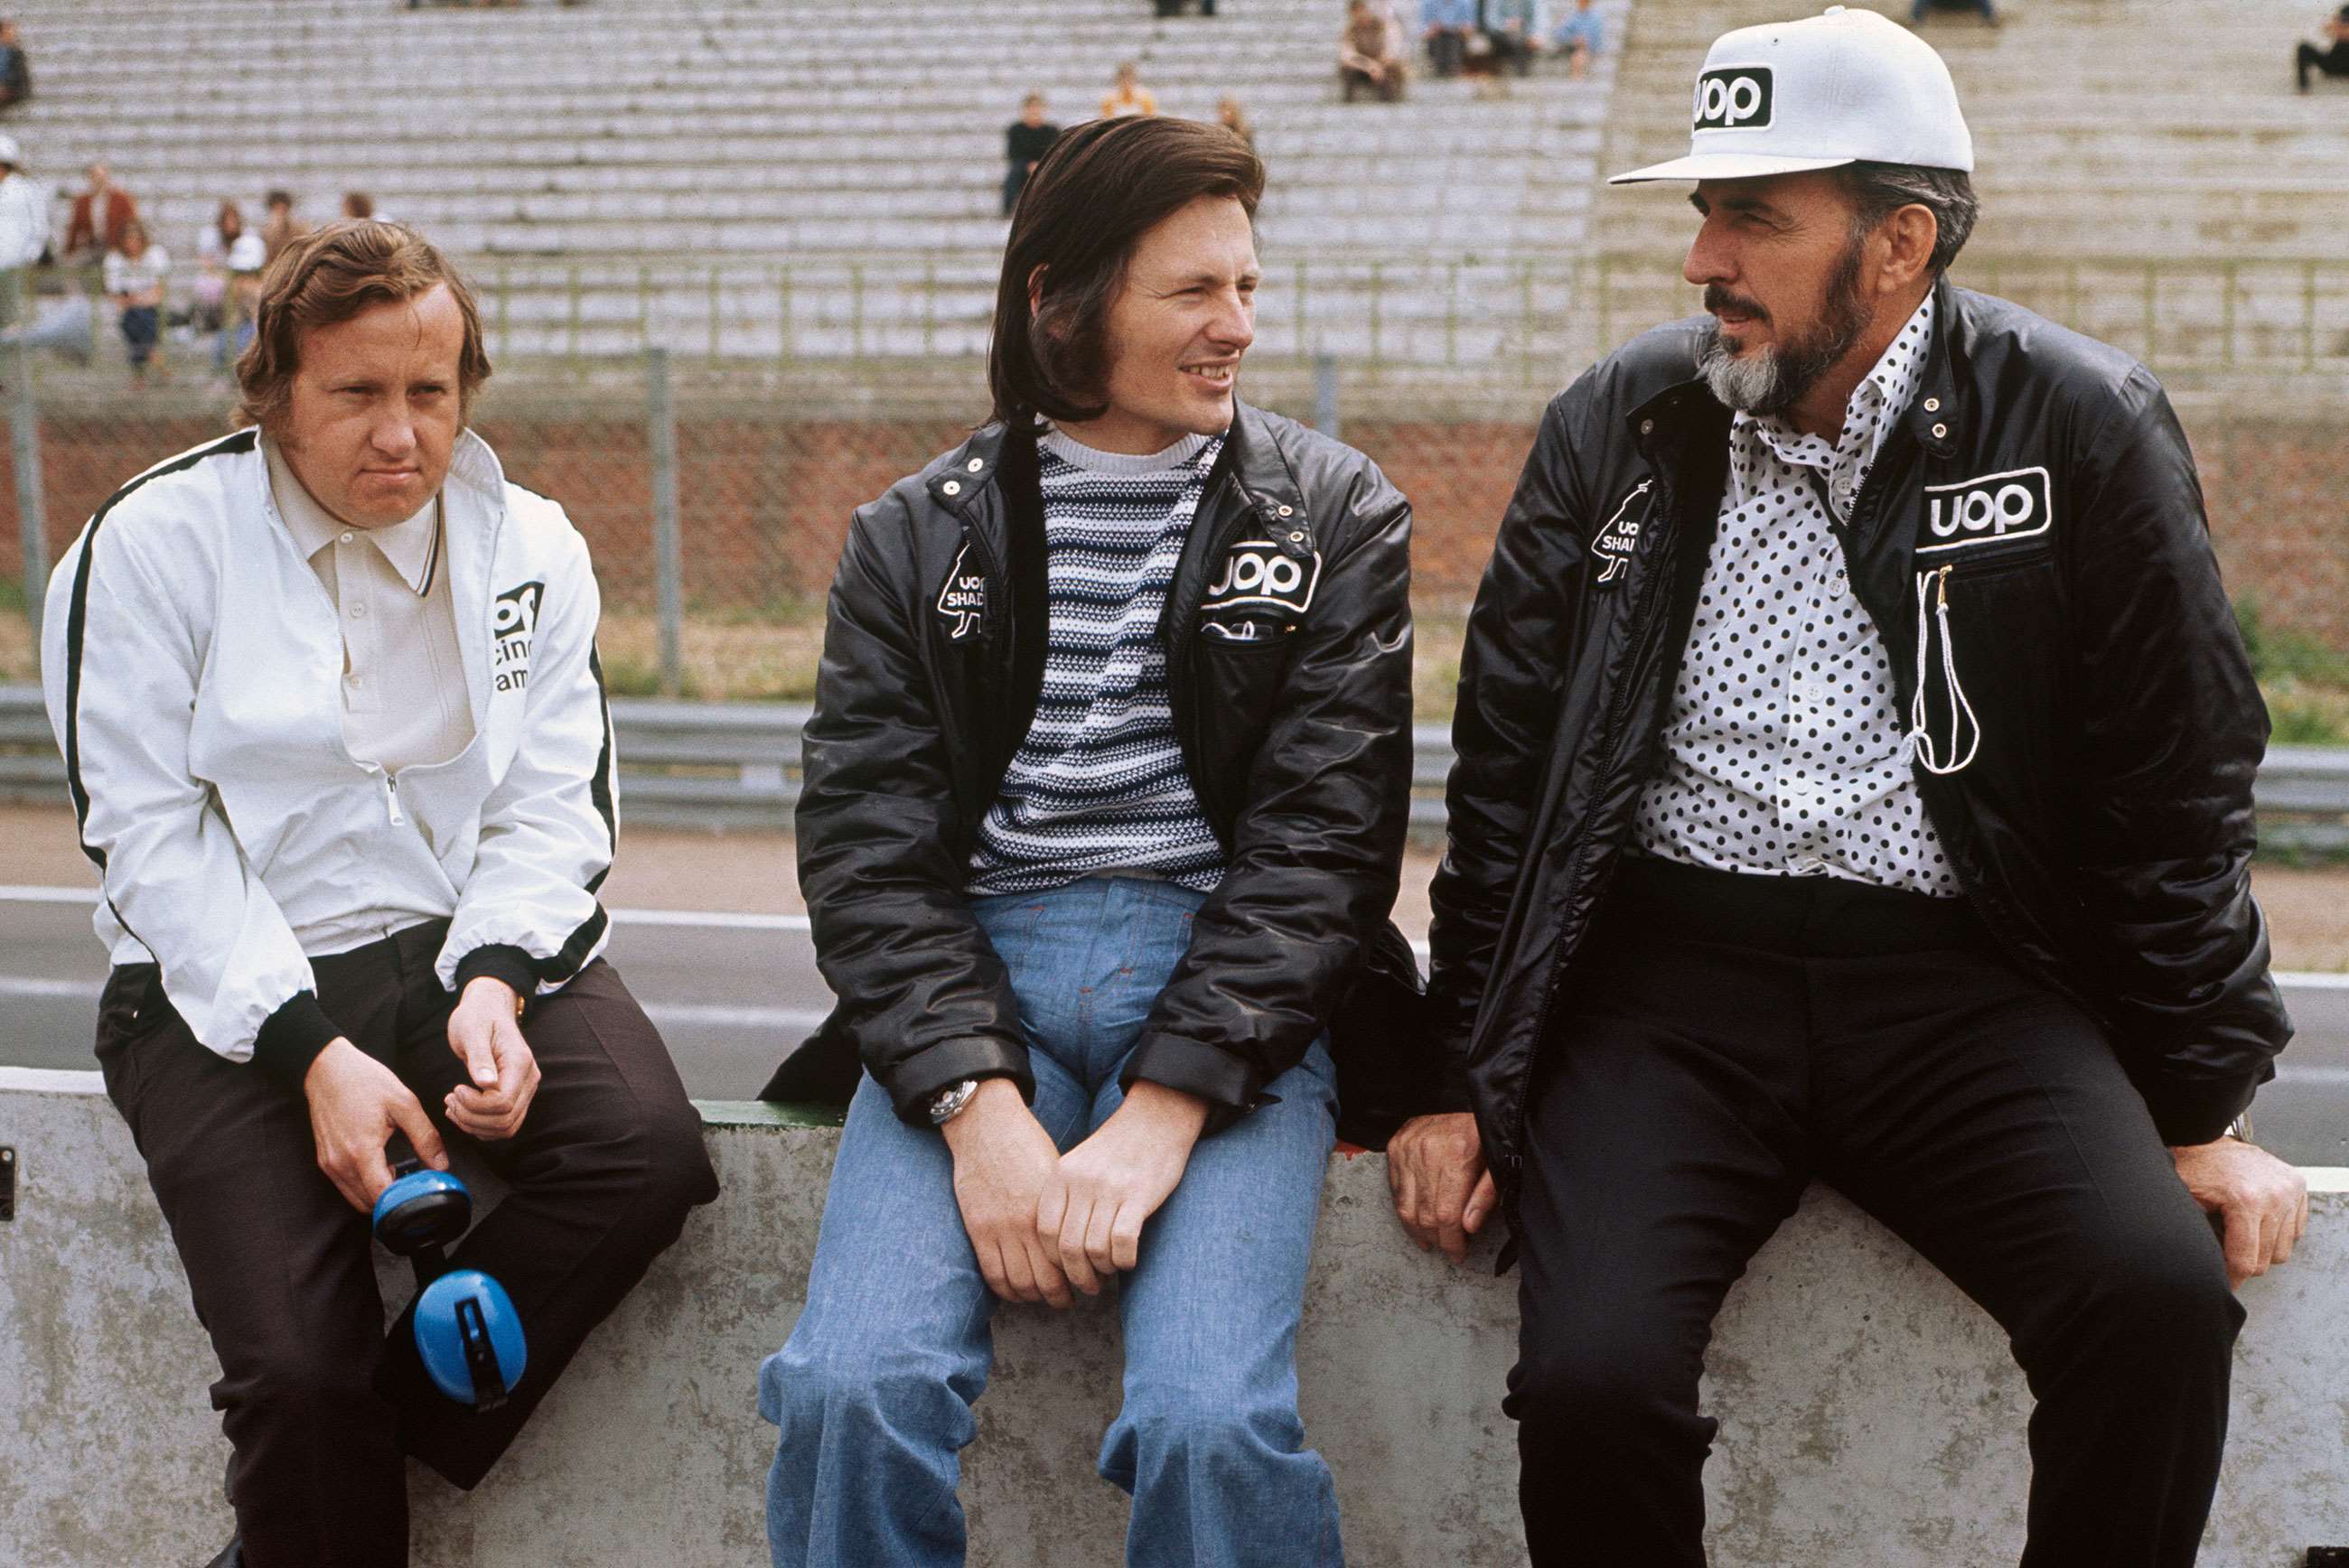 Alan Rees (left), Tony Southgate (centre) and Don Nichols (right) at the 1973 Spanish Grand Prix. 